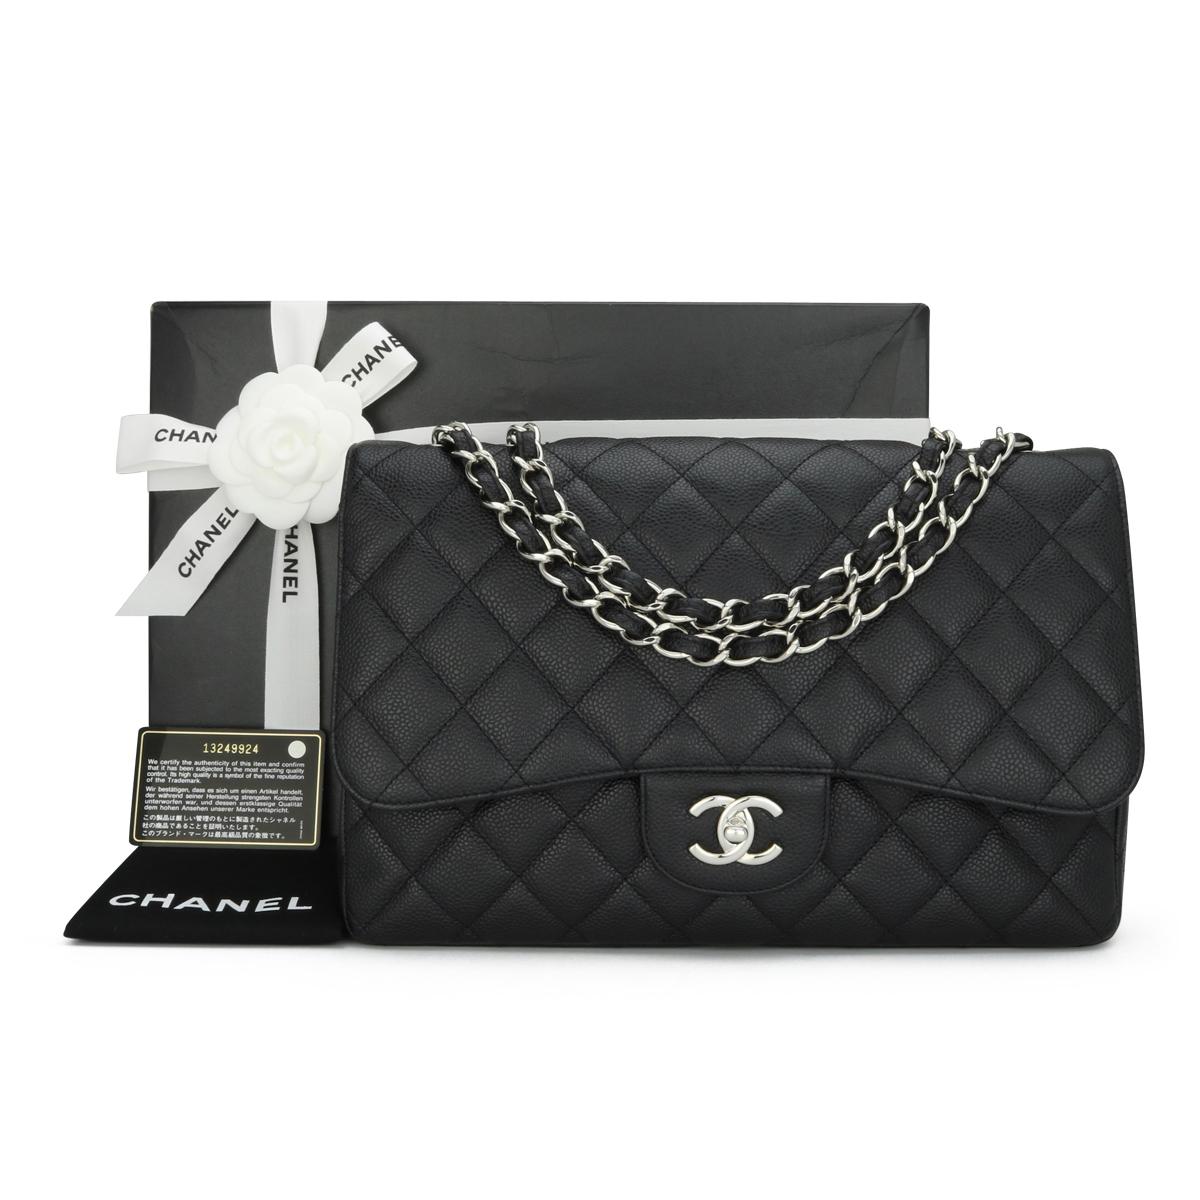 CHANEL Classic Single Flap Jumbo Bag Black Caviar with Silver-Tone Hardware 2010.

This stunning bag is in excellent condition; it still holds its original shape, and the hardware is still very shiny.

It is such a lightweight bag compared to